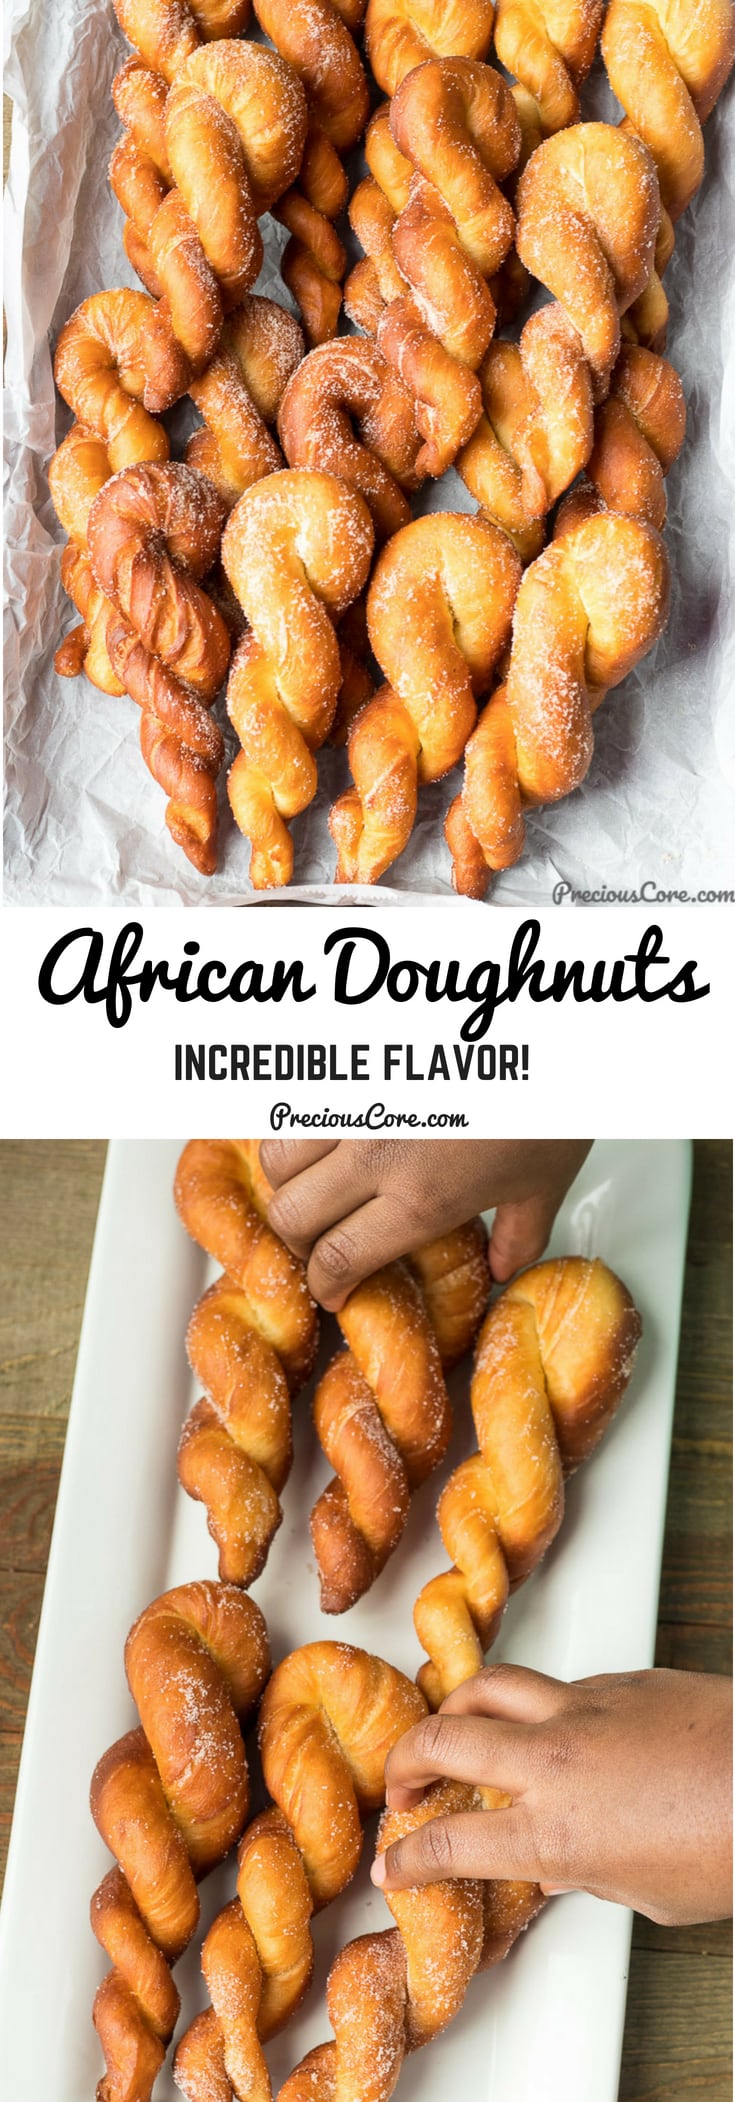 These African doughnuts! They are sweet, slightly crunchy on the outside, fluffy on the inside, butter and incredibly delicious! Enjoy them for breakfast, snack time, parties or potlucks. They are so good! Get the full recipe on Precious Core. #African Doughnuts #Snacks #AfricanFood #SummerRecipes #PreciousCore